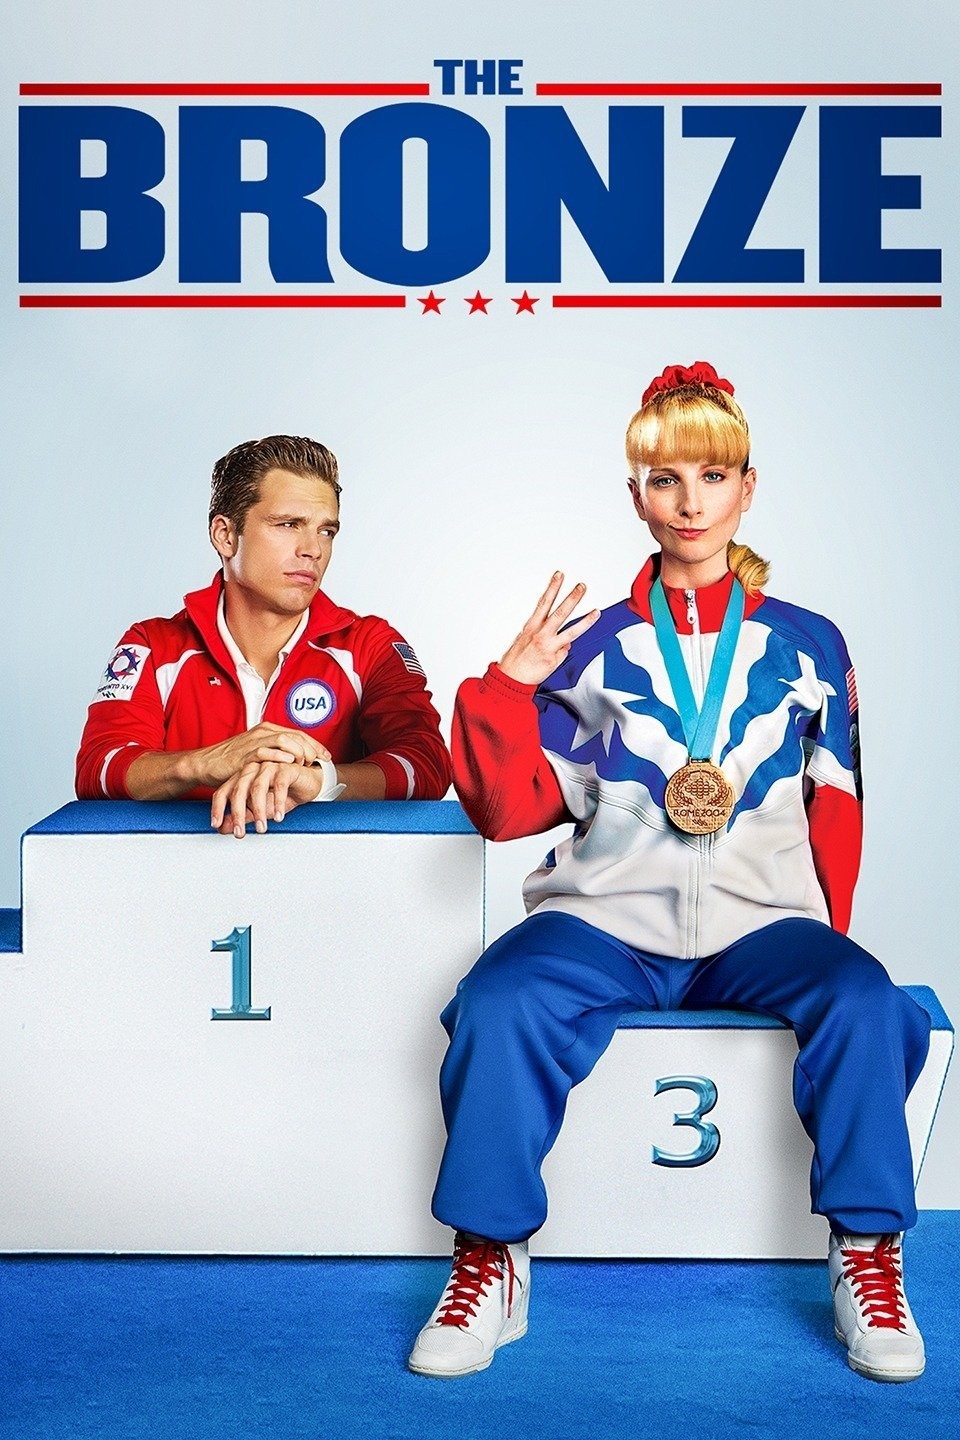 Image of the movie poster for The Bronze